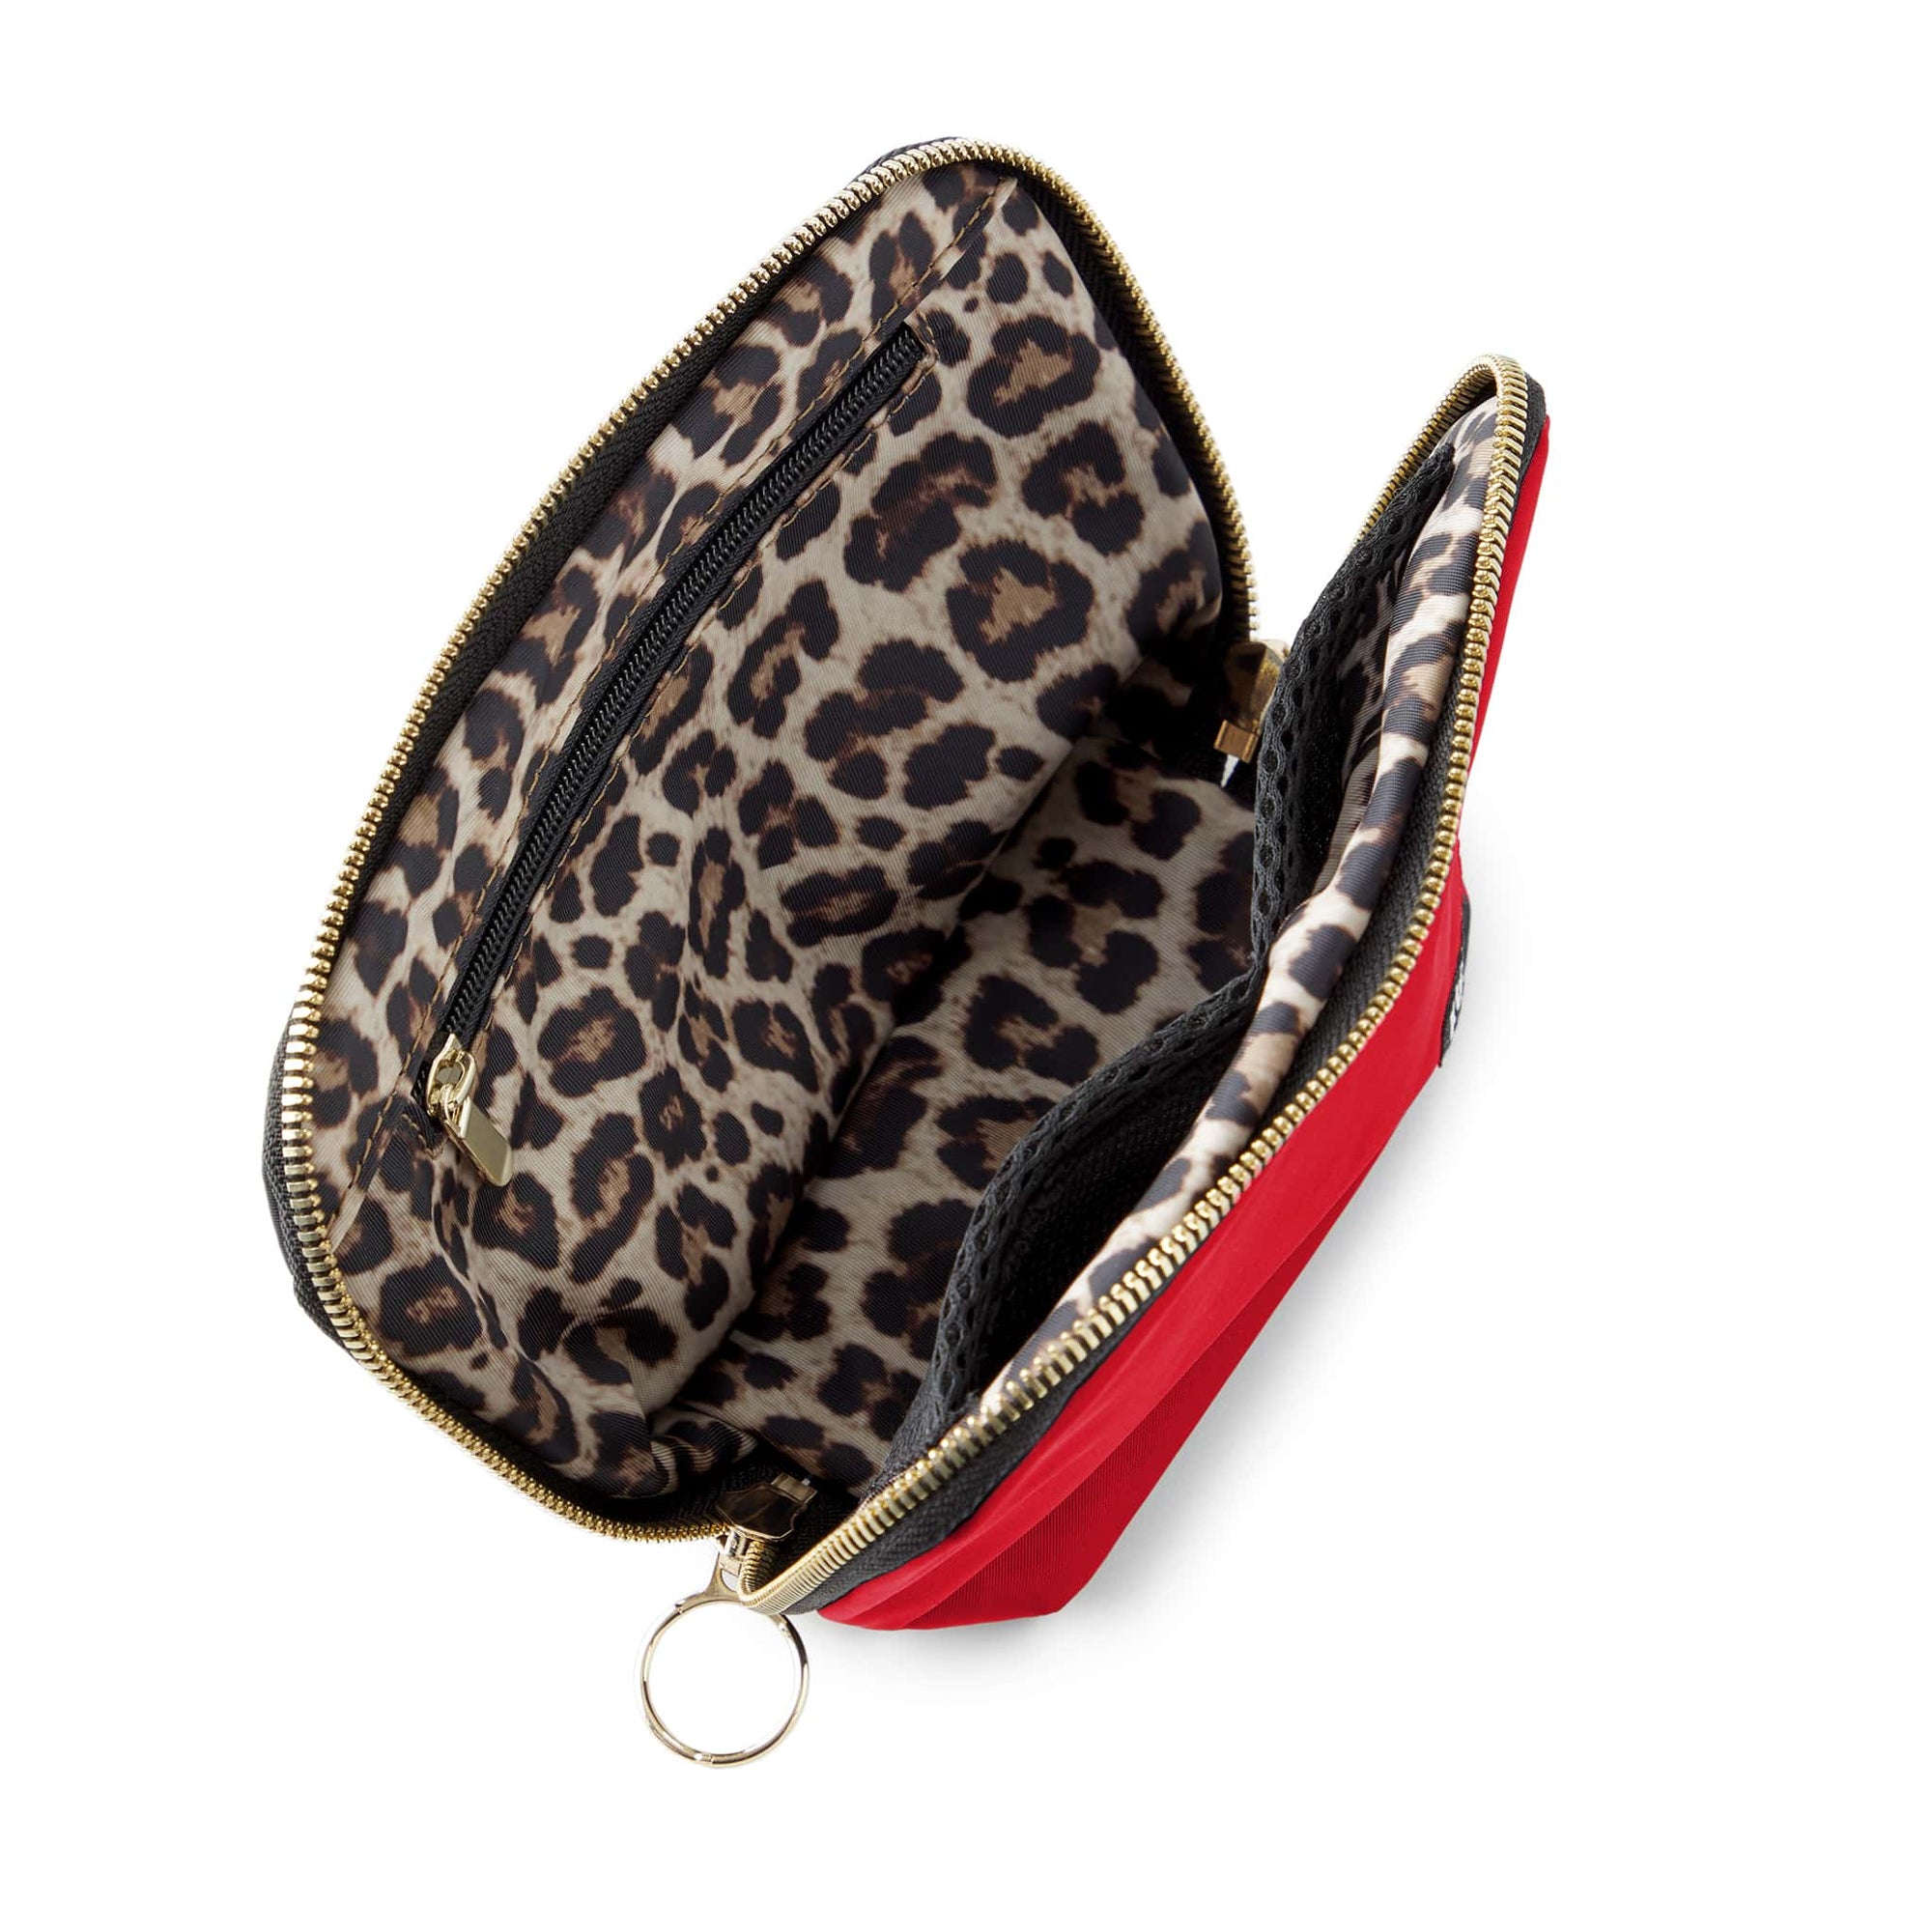 color: Candy Apple Red Fabric with Leopard Interior; alt: Everyday Small Size Makeup Bag | KUSSHI